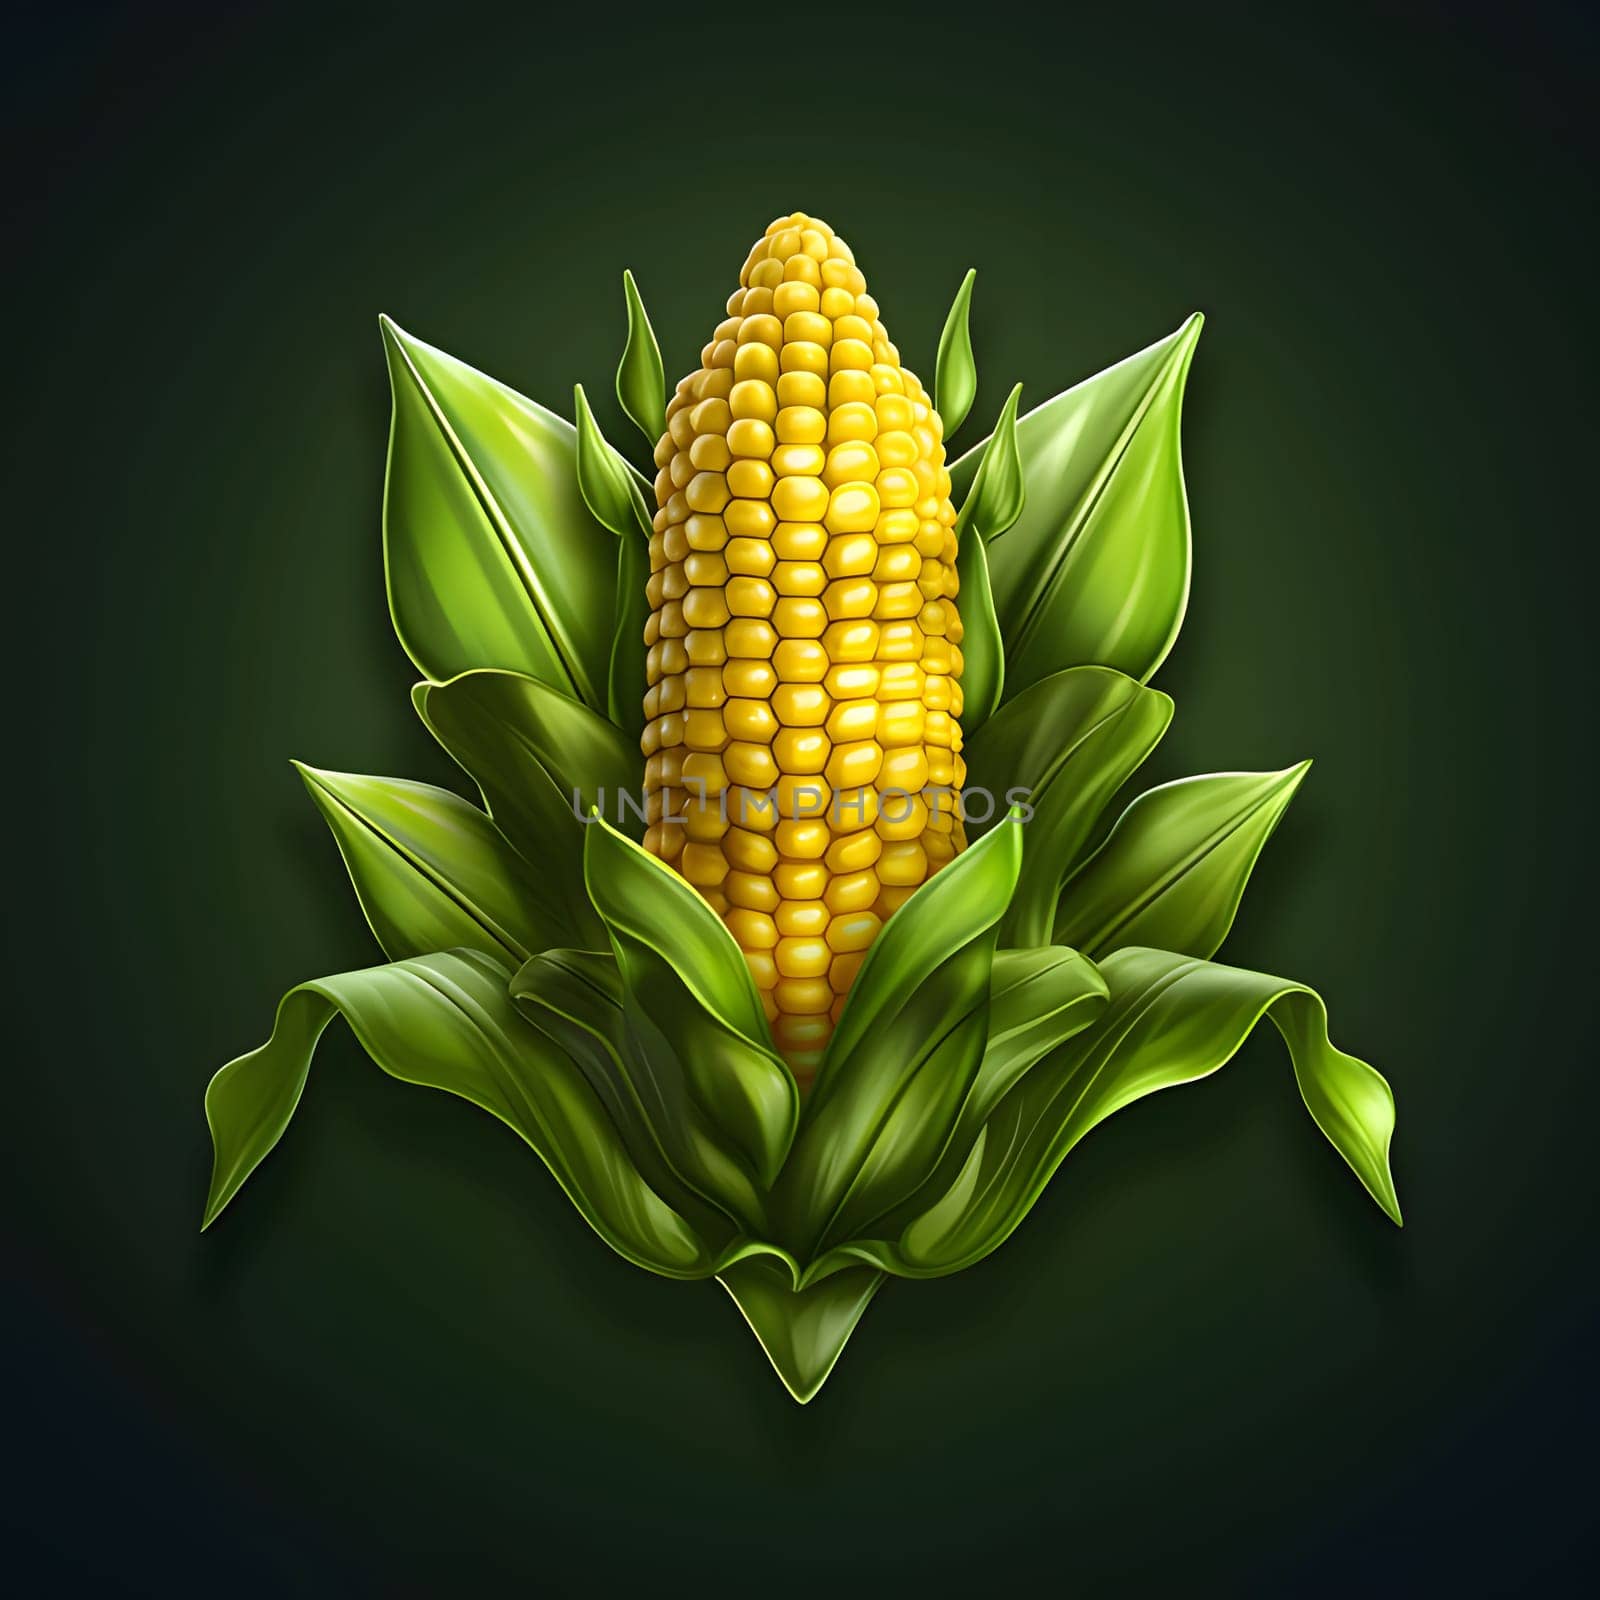 Cob of corn in green Leaf on a solid dark background. Corn as a dish of thanksgiving for the harvest. by ThemesS